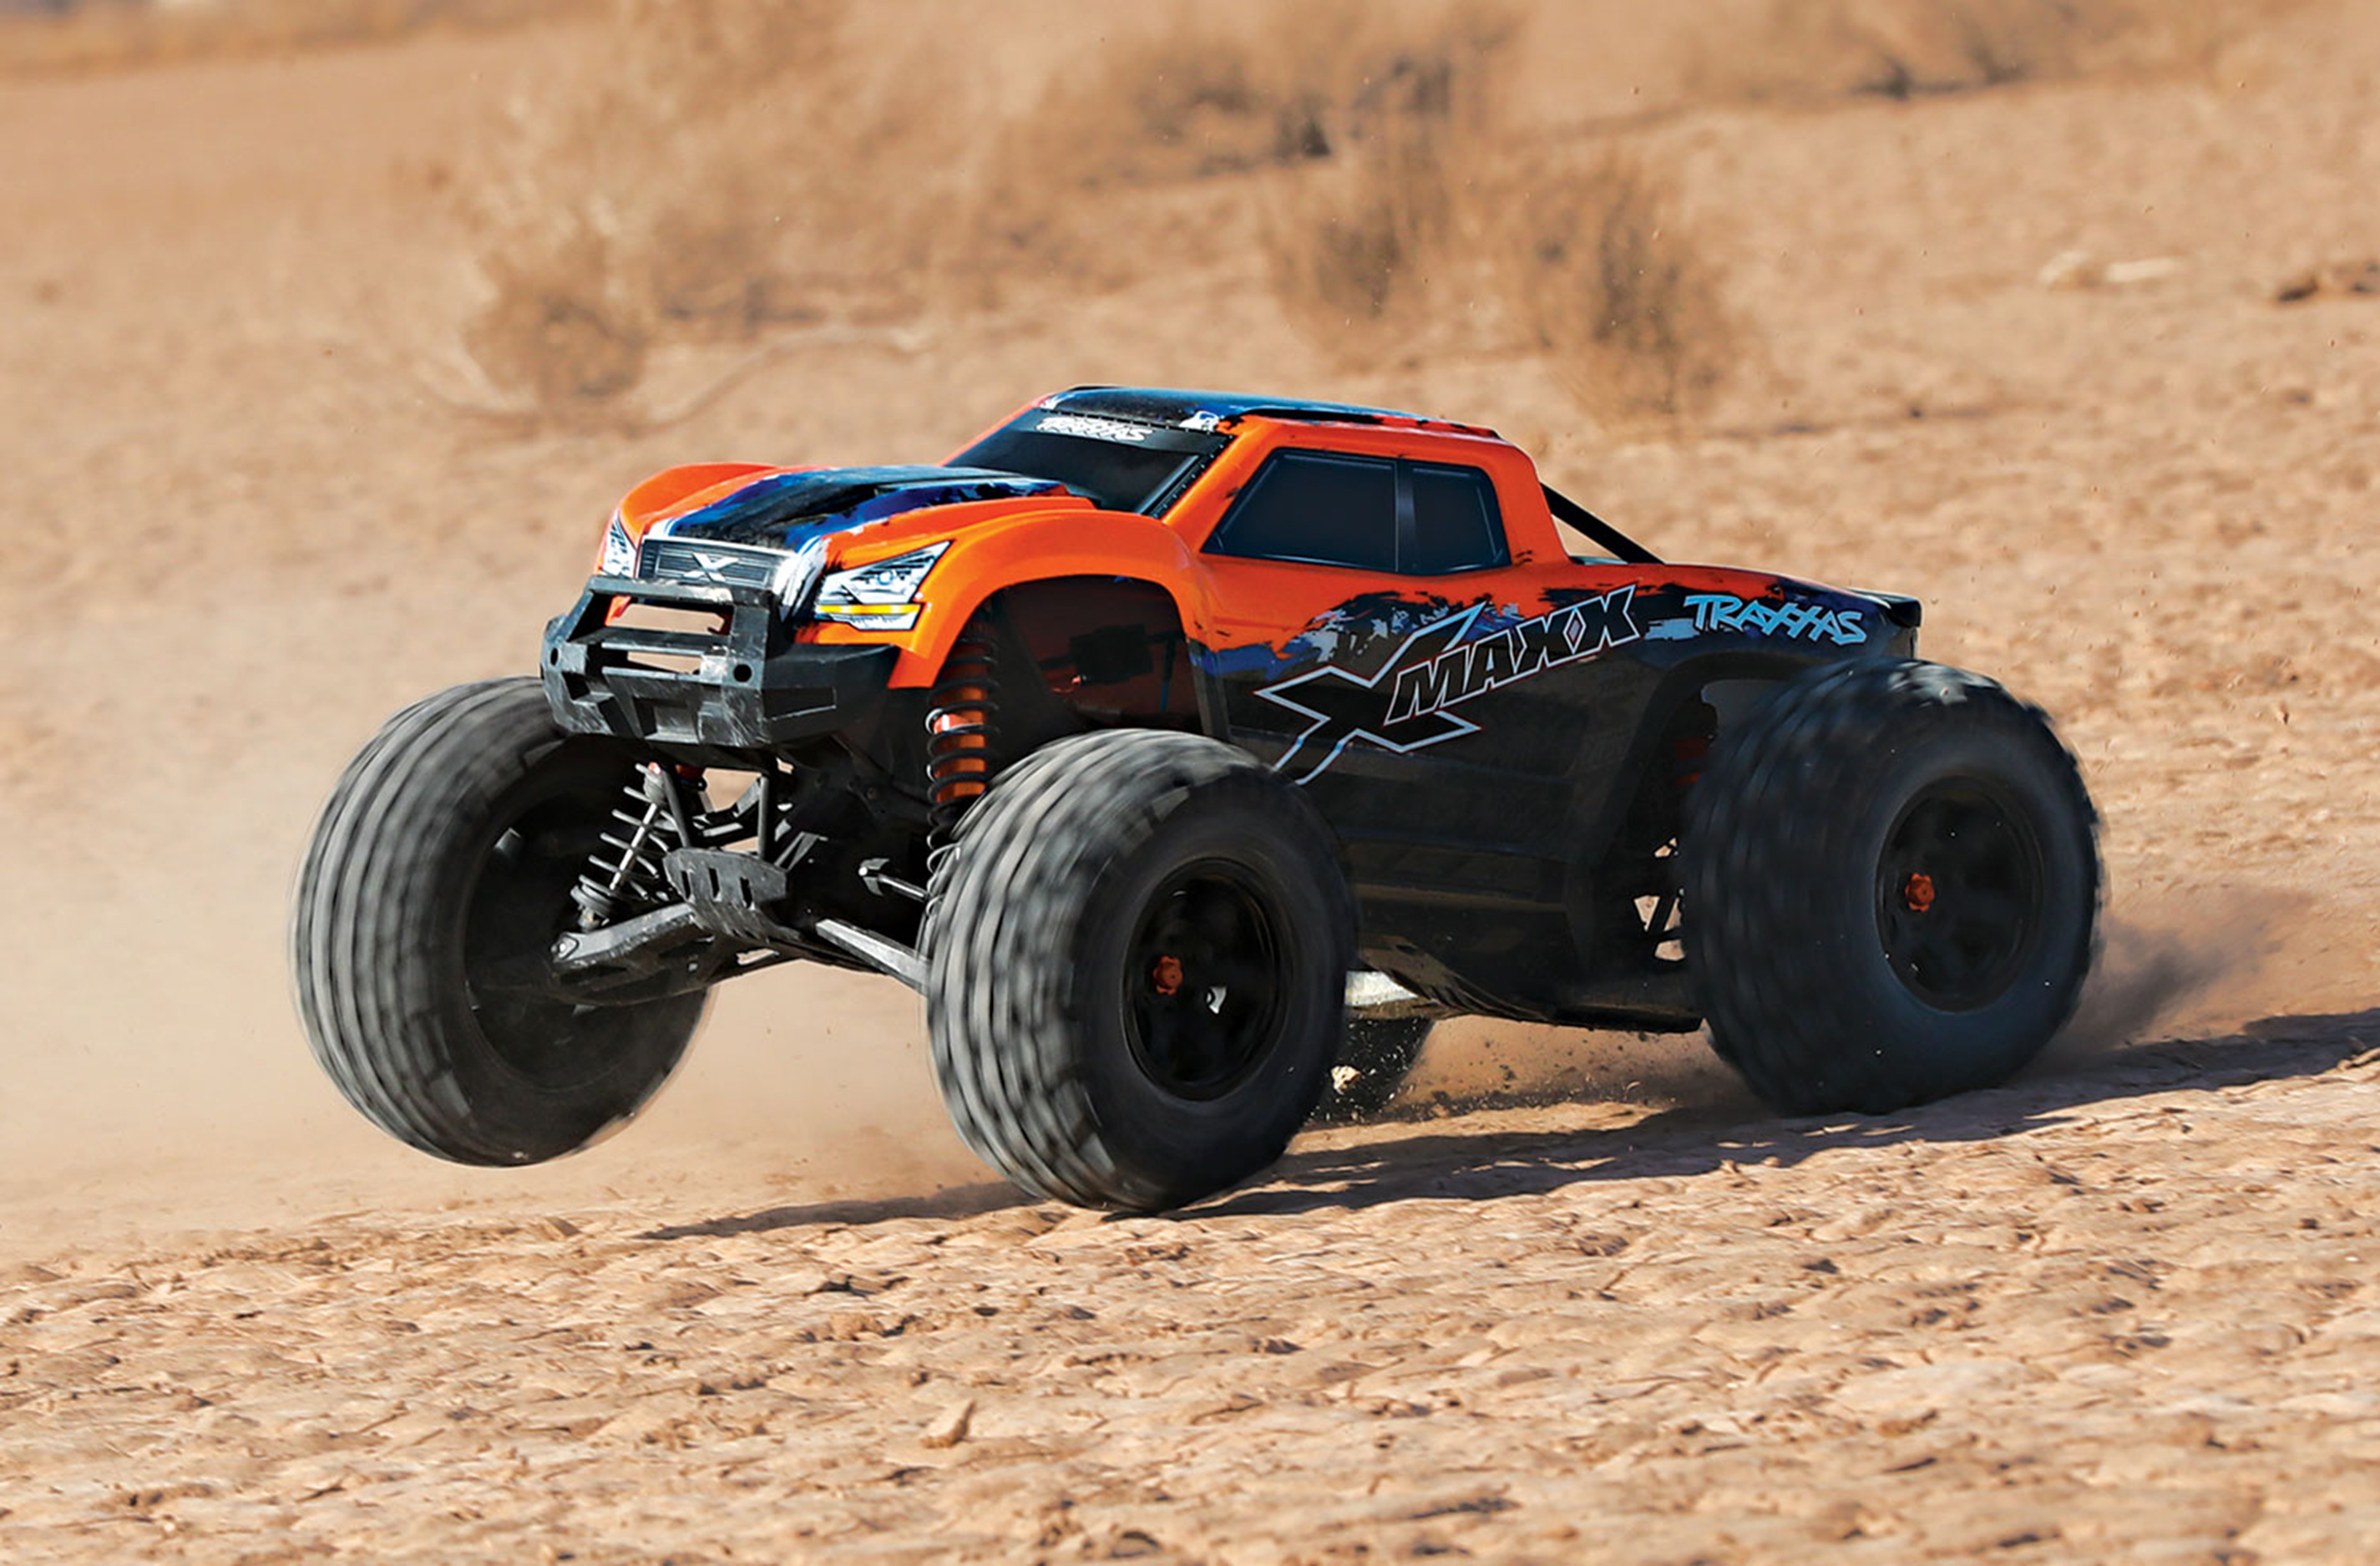 Traxxas X-MAXX 4x4 new 8S version RTR complete set with 2x 4S / 5000 mAh batteries Orange